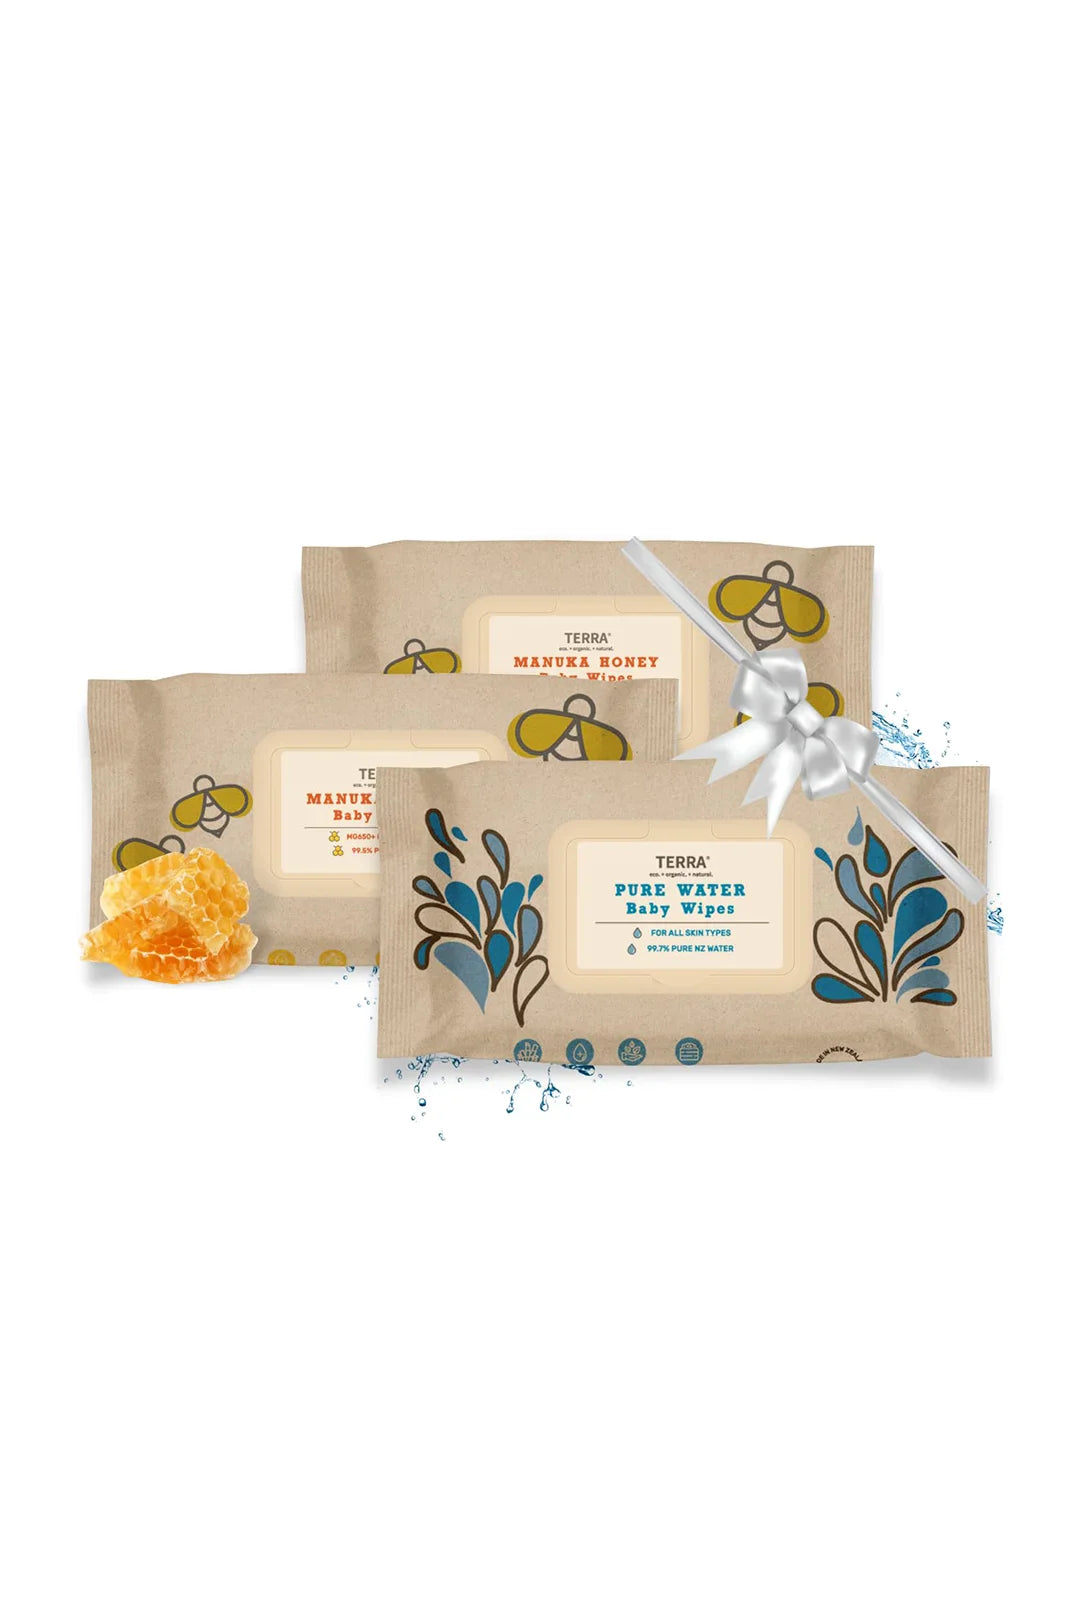 Terra Manuka Honey Baby Wipes and Pure Water Baby Wipes